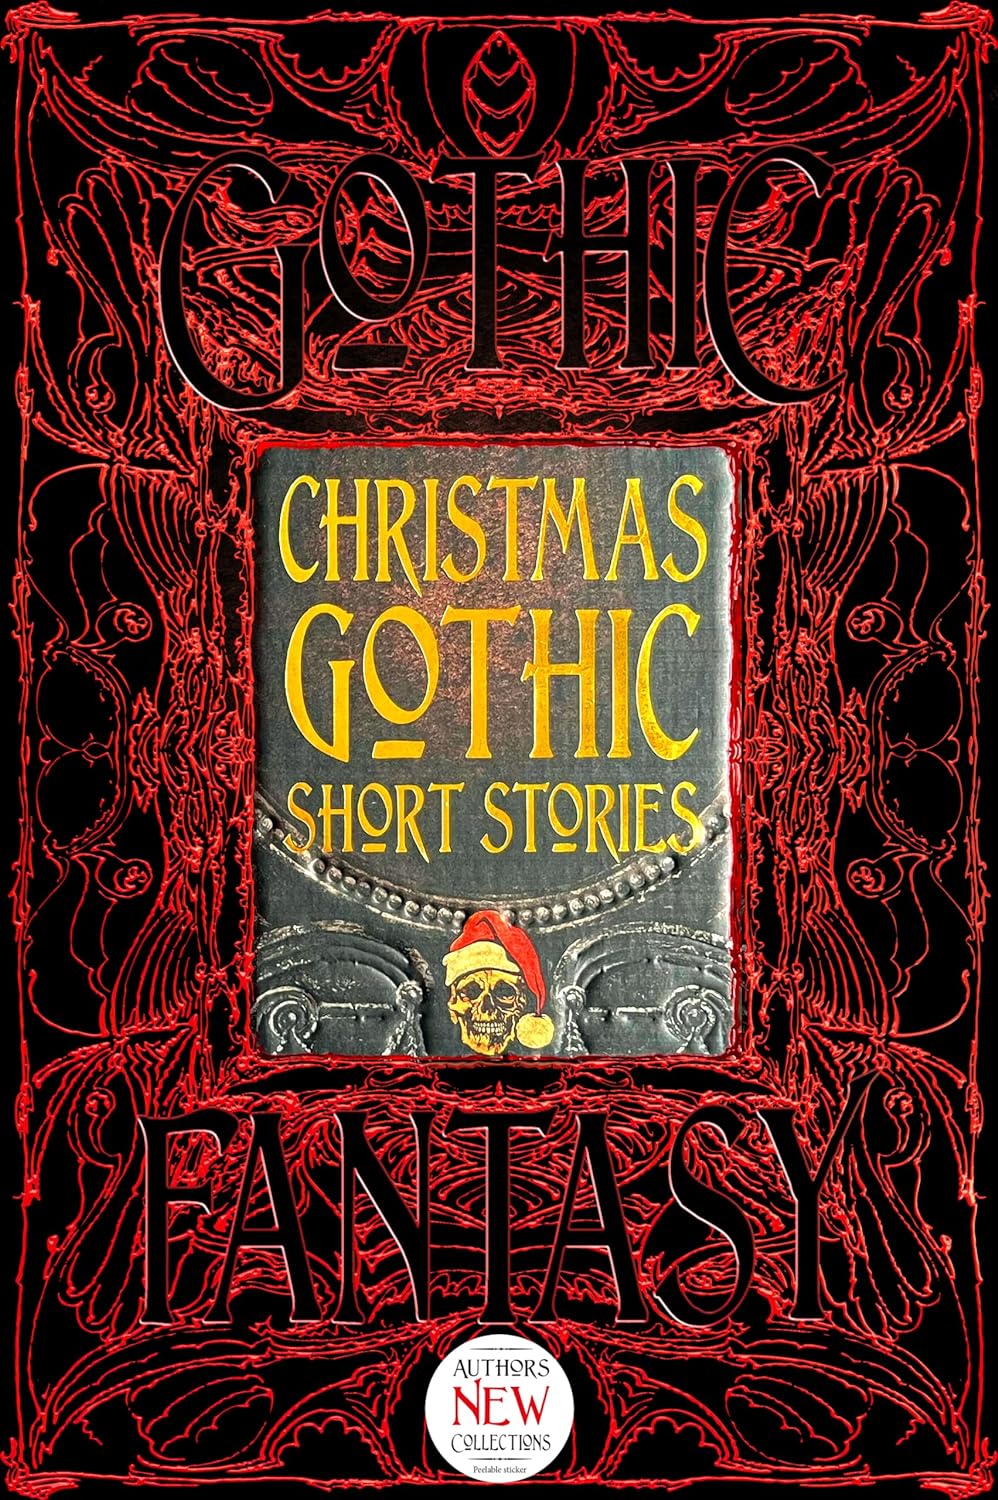 Load image into Gallery viewer, A red and black book cover. The background of the cover depicts a gothic floral pattern in red against black, with the words gothic fantasy spelled out in the pattern. In the center is a gray stone tablet, with a skull at the bottom wearing a Santa Claus hat. Yellow text above the skull says Christmas Gothic Short Stories.
